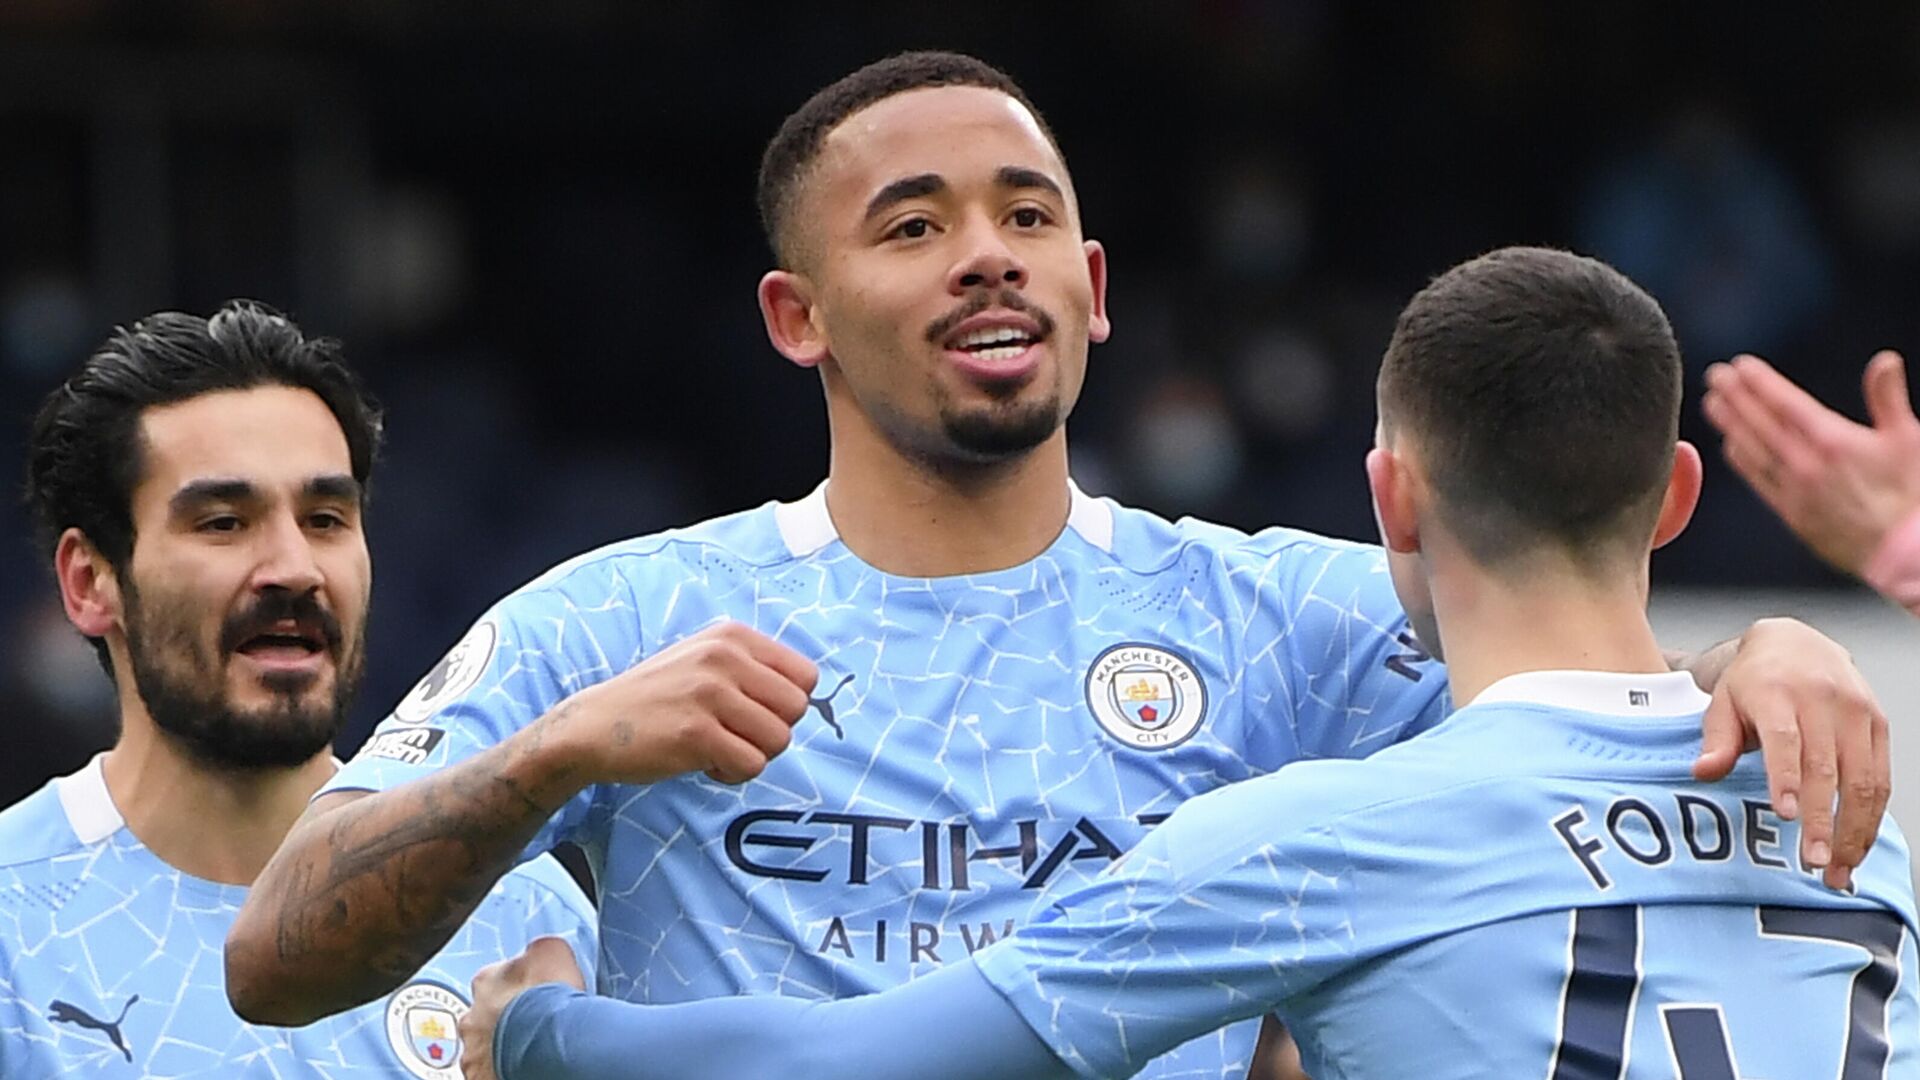 Manchester City's Brazilian striker Gabriel Jesus (C) celebrates scoring the opening goal during the English Premier League football match between Manchester City and Sheffield United at the Etihad Stadium in Manchester, north west England, on January 30, 2021. (Photo by Michael Regan / POOL / AFP) / RESTRICTED TO EDITORIAL USE. No use with unauthorized audio, video, data, fixture lists, club/league logos or 'live' services. Online in-match use limited to 120 images. An additional 40 images may be used in extra time. No video emulation. Social media in-match use limited to 120 images. An additional 40 images may be used in extra time. No use in betting publications, games or single club/league/player publications. /  - РИА Новости, 1920, 30.01.2021